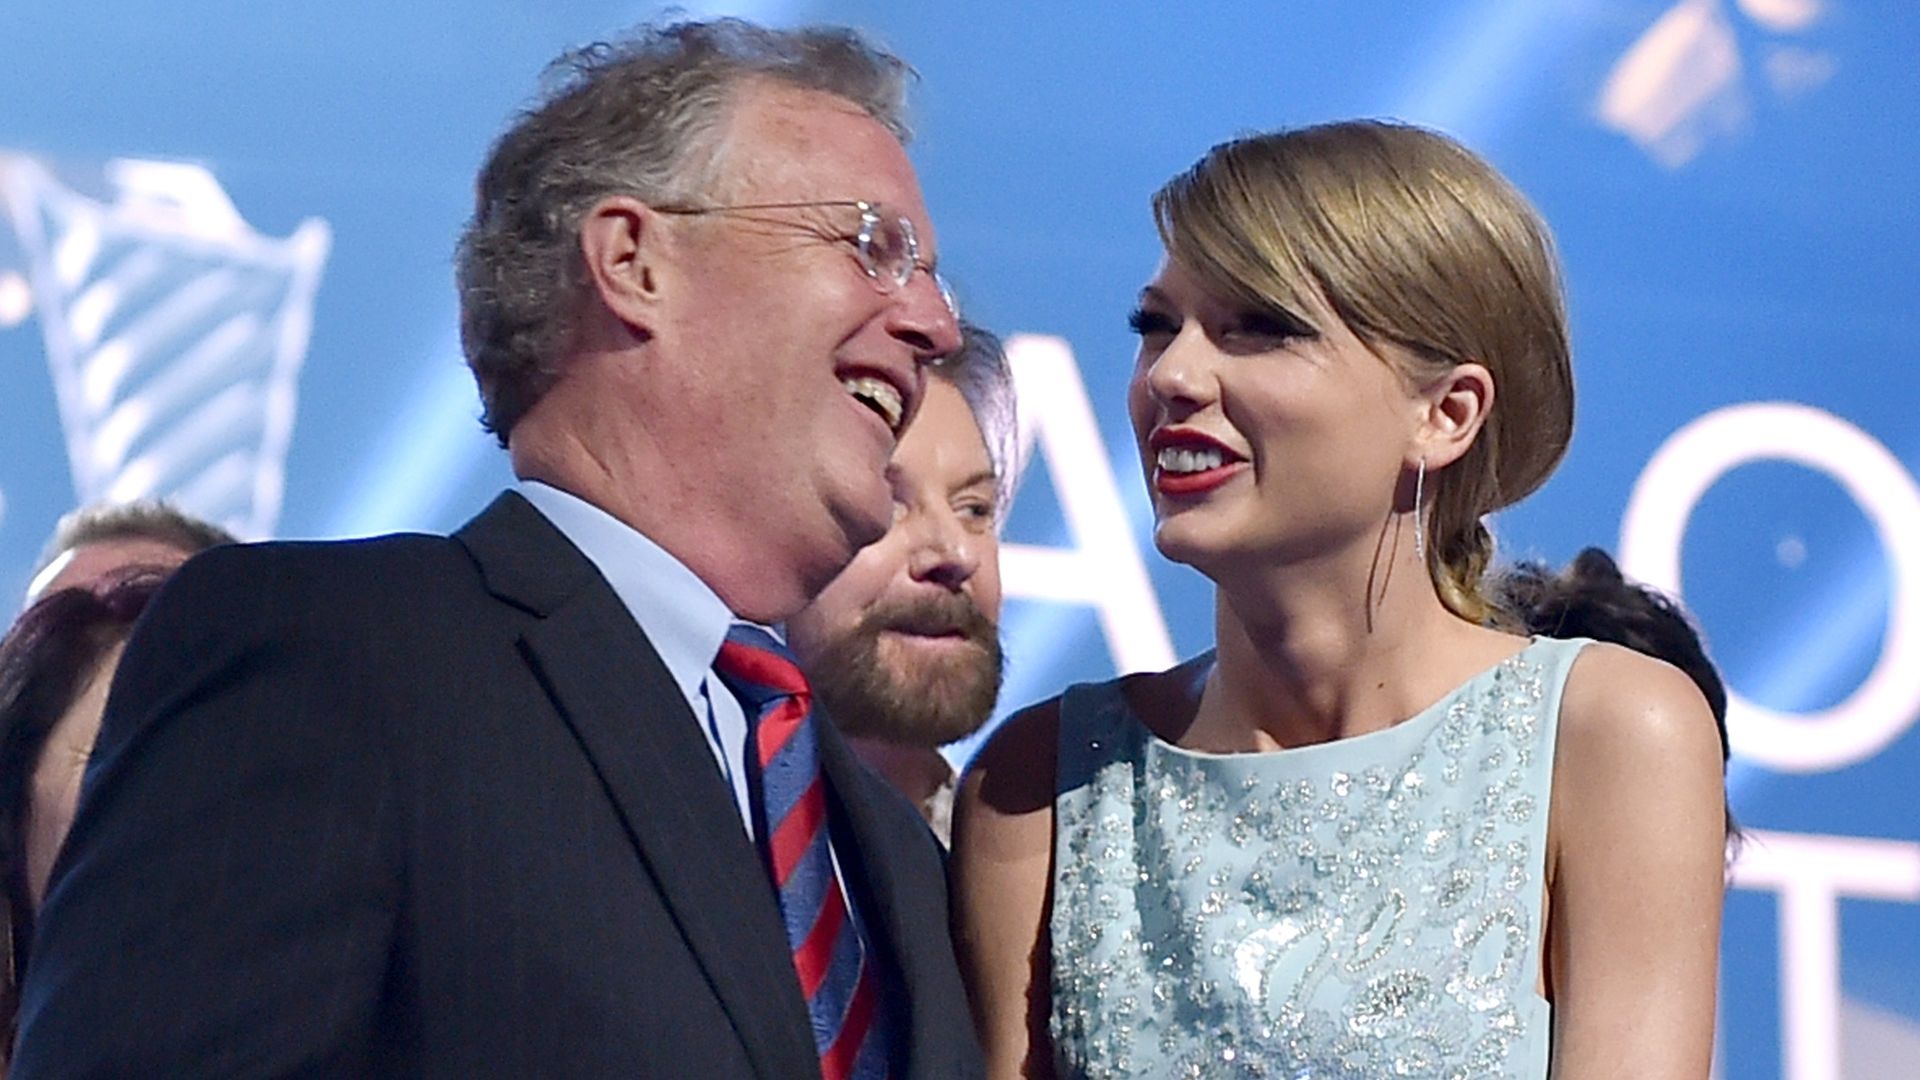 Taylor standing laughing with her dad Scott at an event